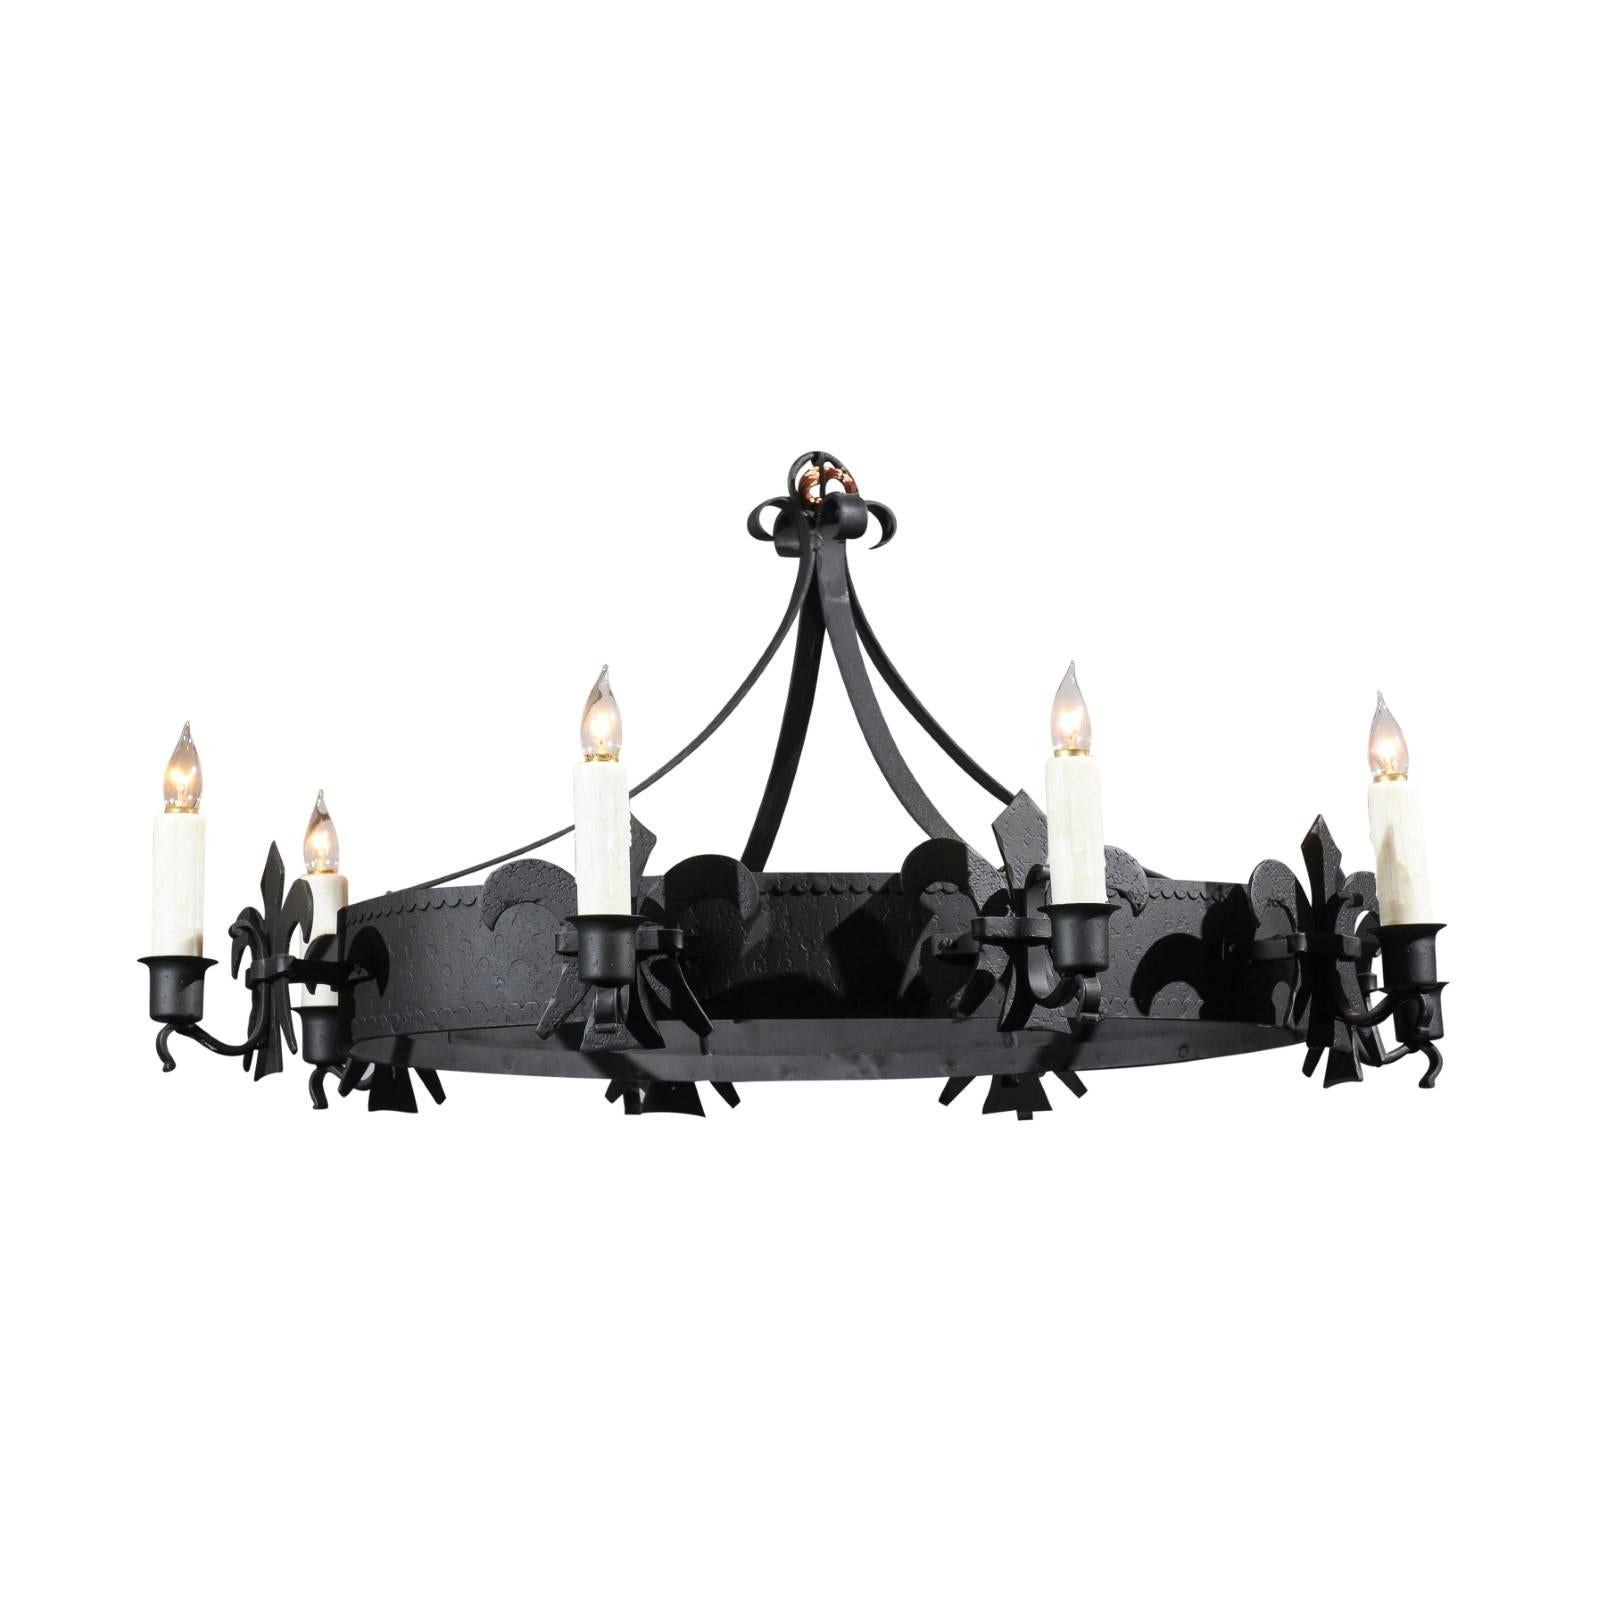 Gothic Style French Oval Wrought-Iron Eight-Light Chandelier with Fleurs-de-Lys For Sale